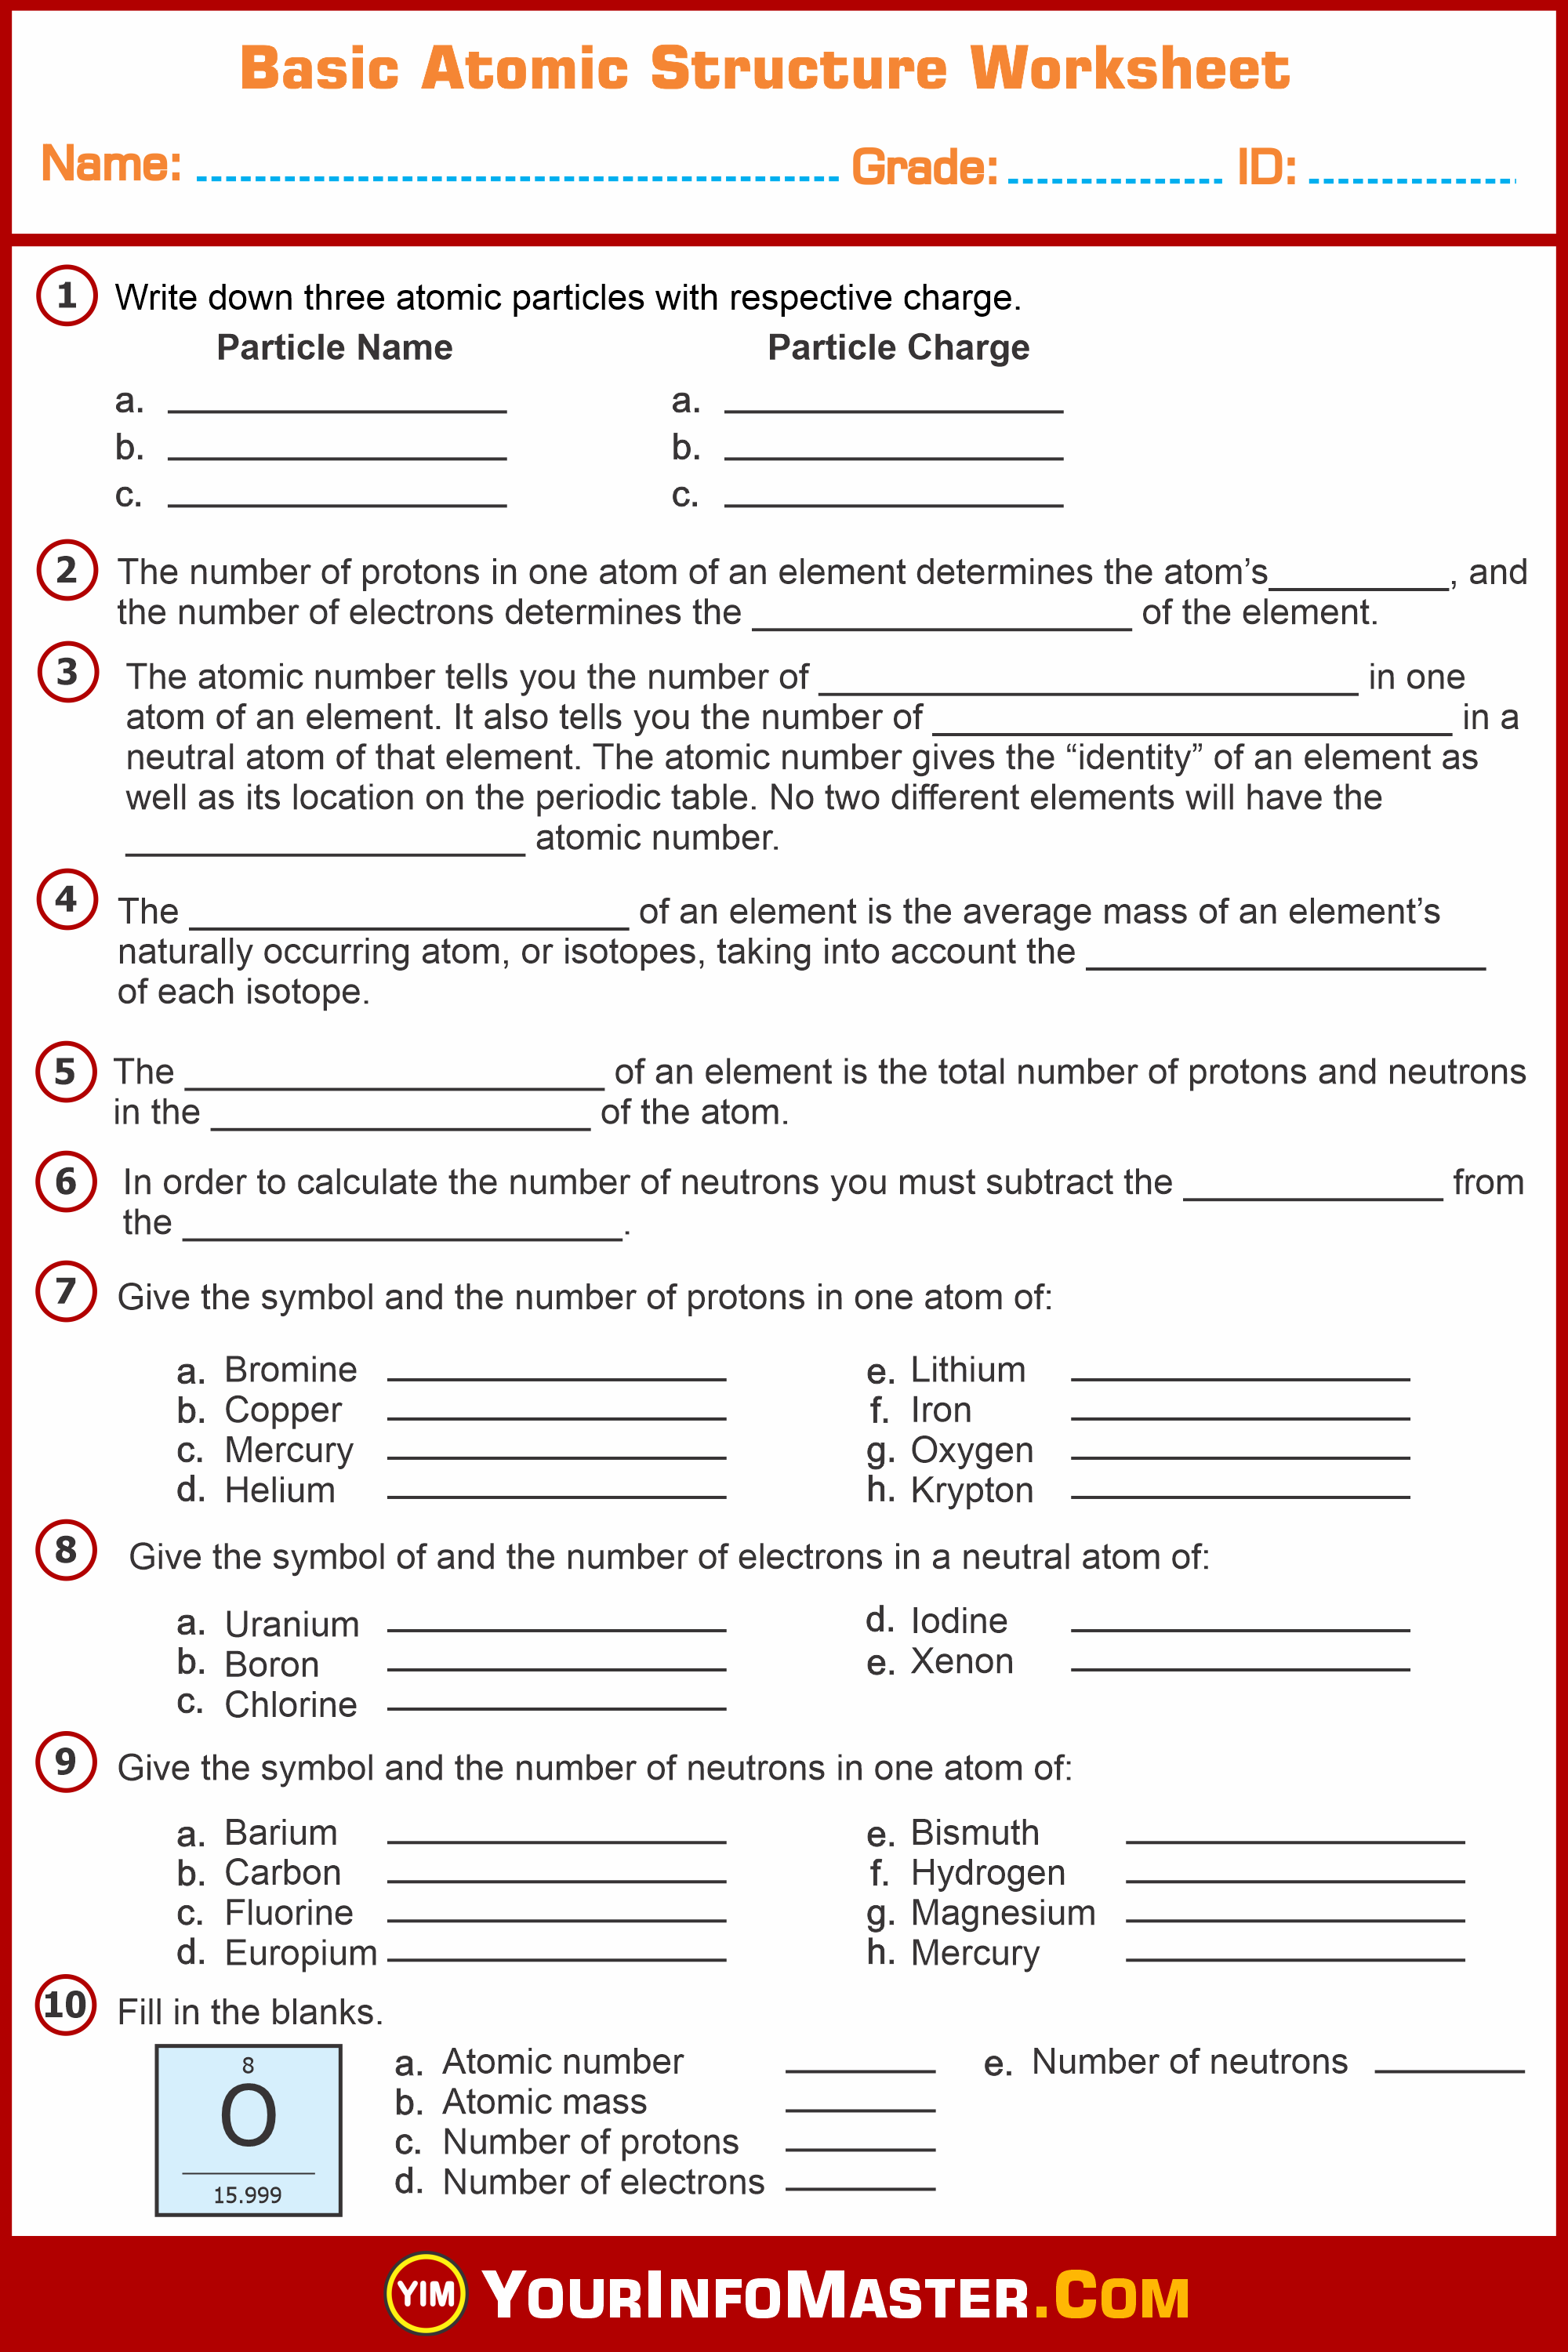 Basic Atomic Structure Worksheet - Your Info Master Inside Basic Atomic Structure Worksheet